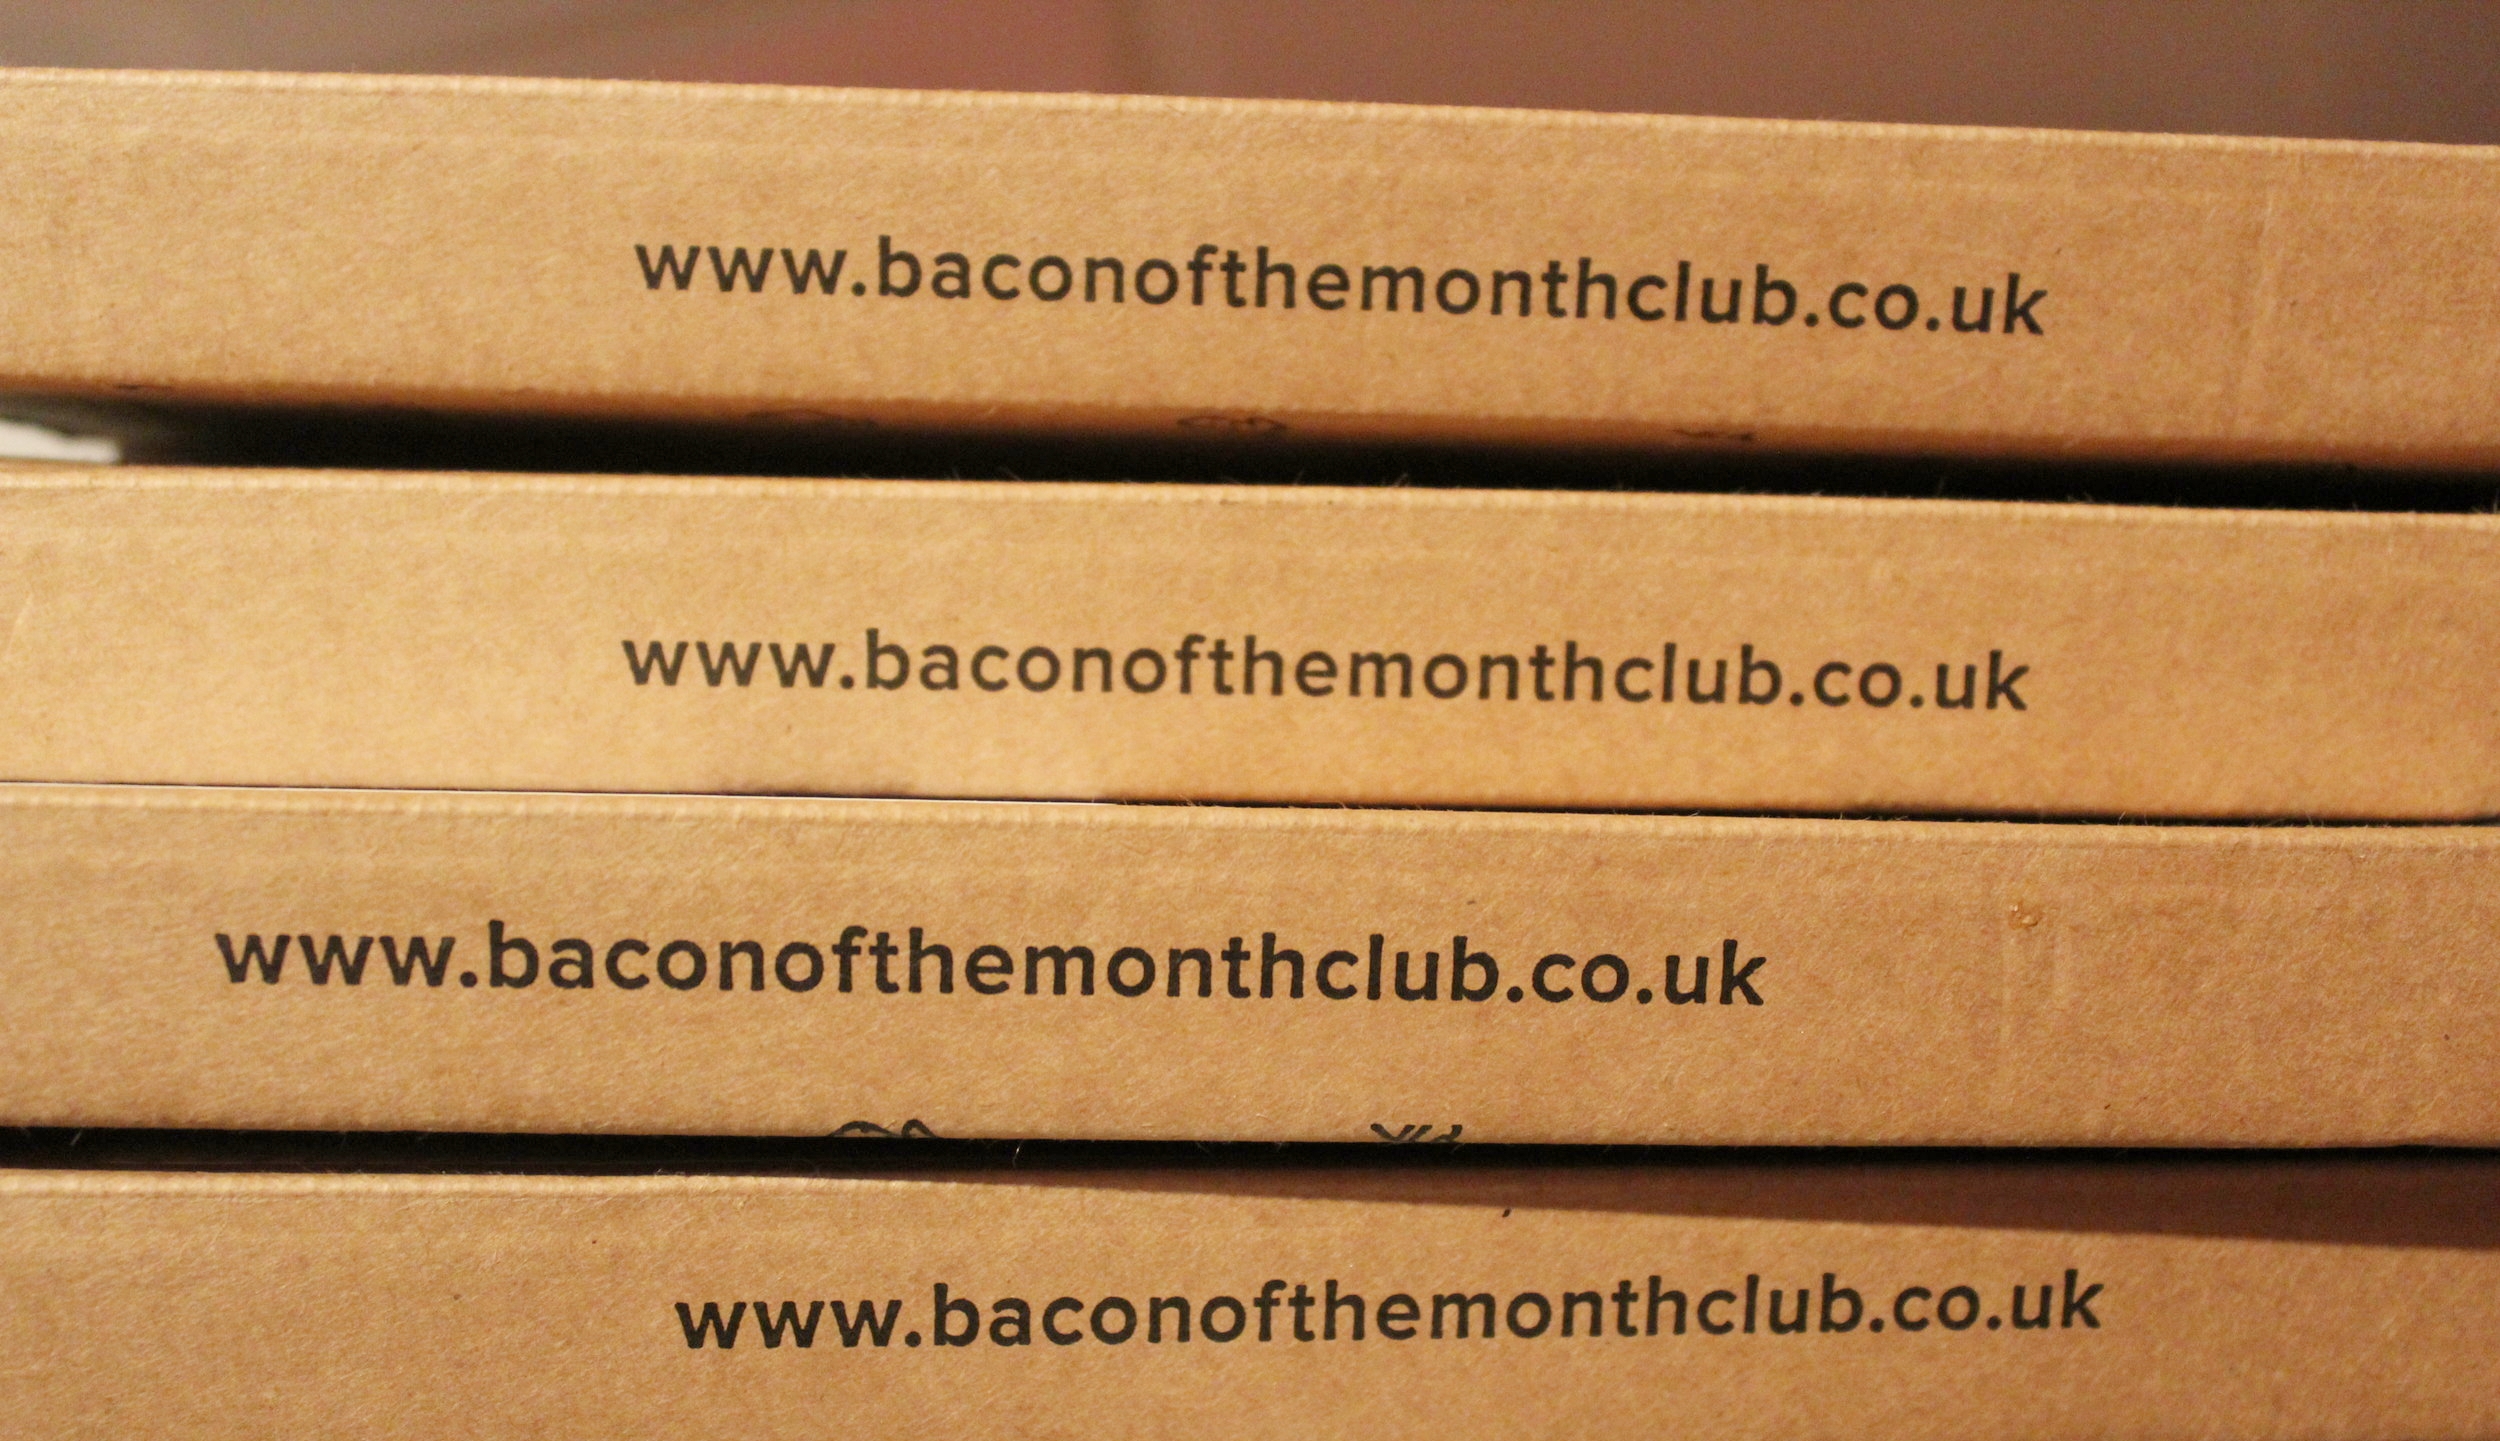 Bacon of the month club